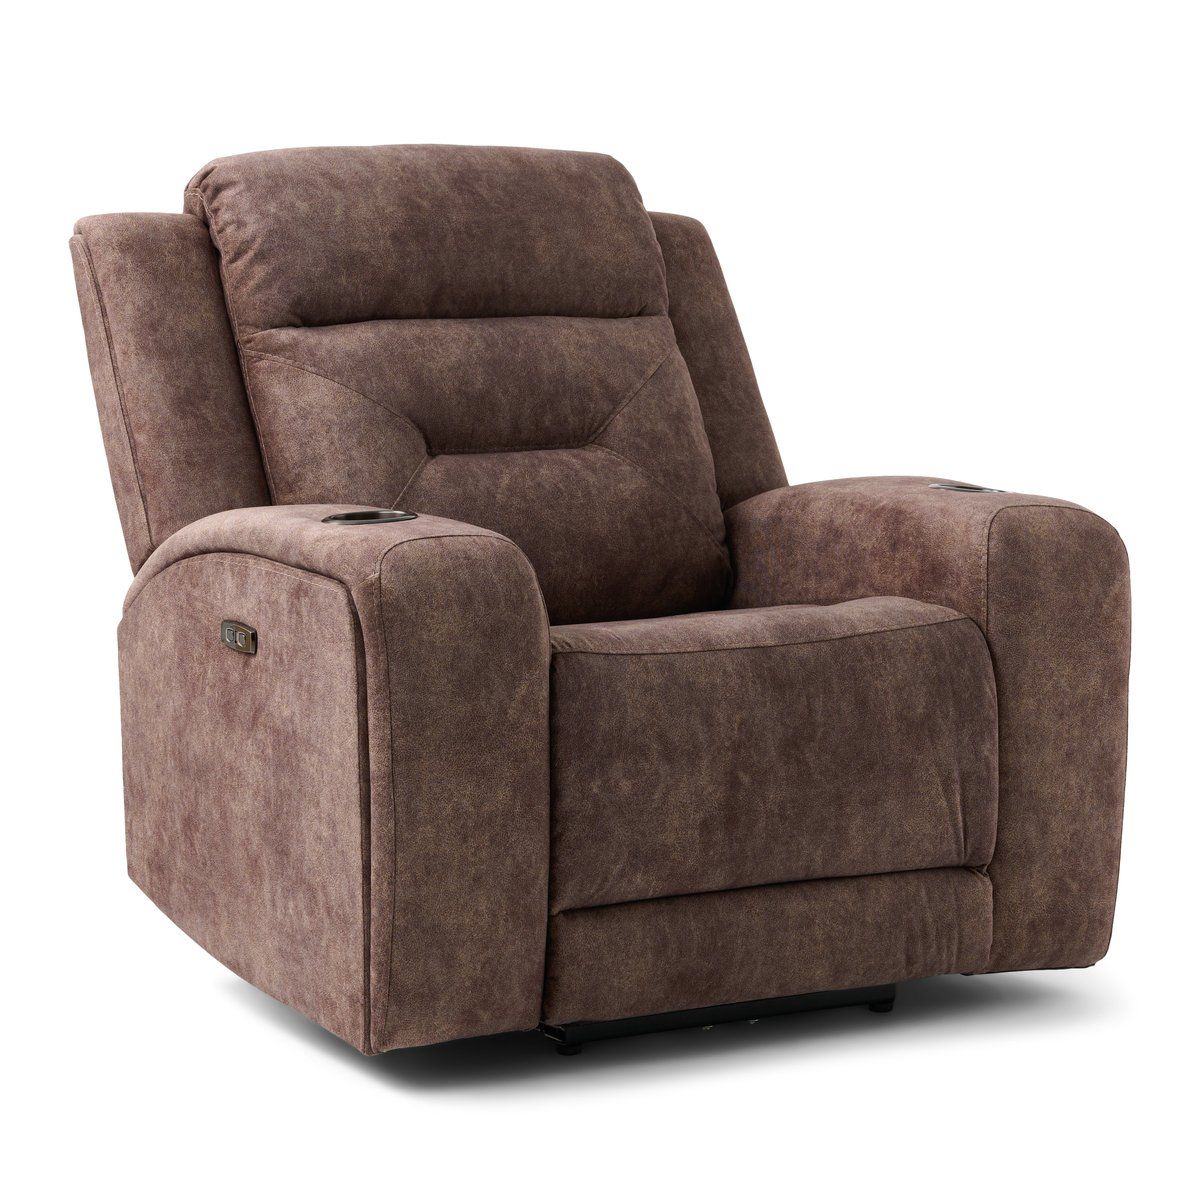 Picture of Outlier Recliner